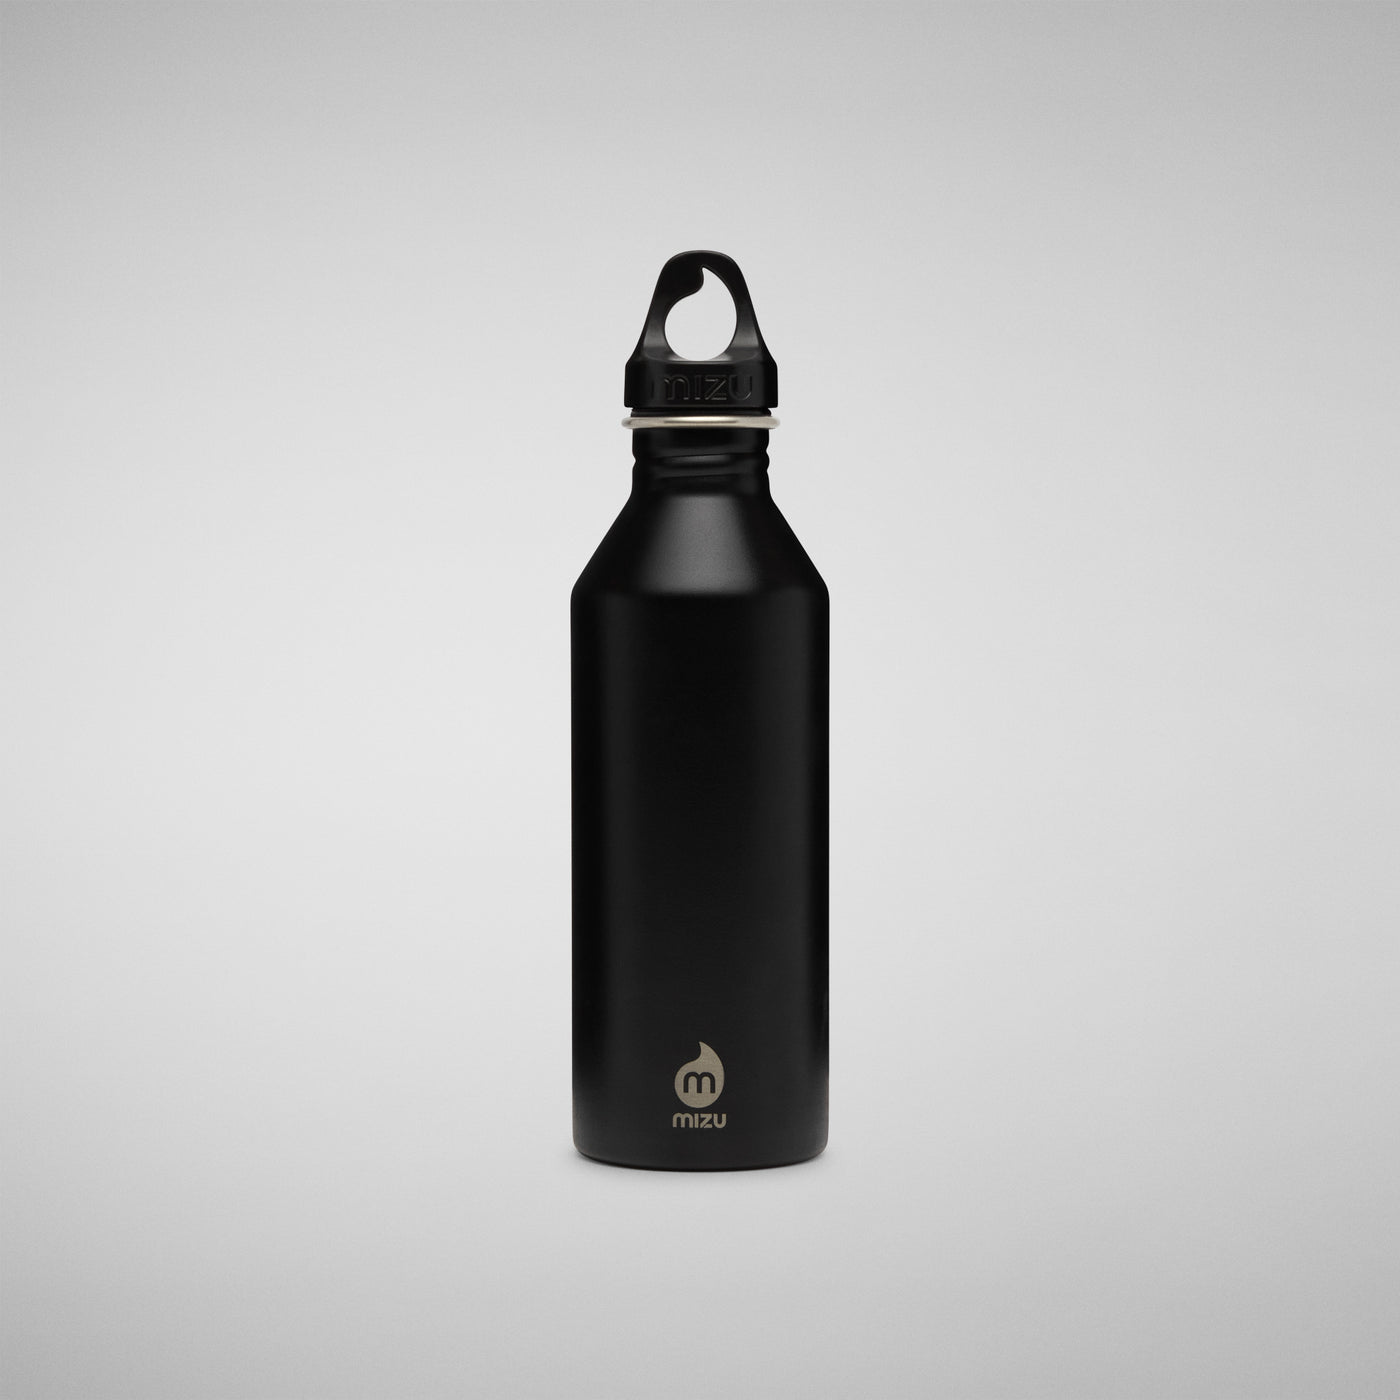 Back View of Celso Water Bottle in Black